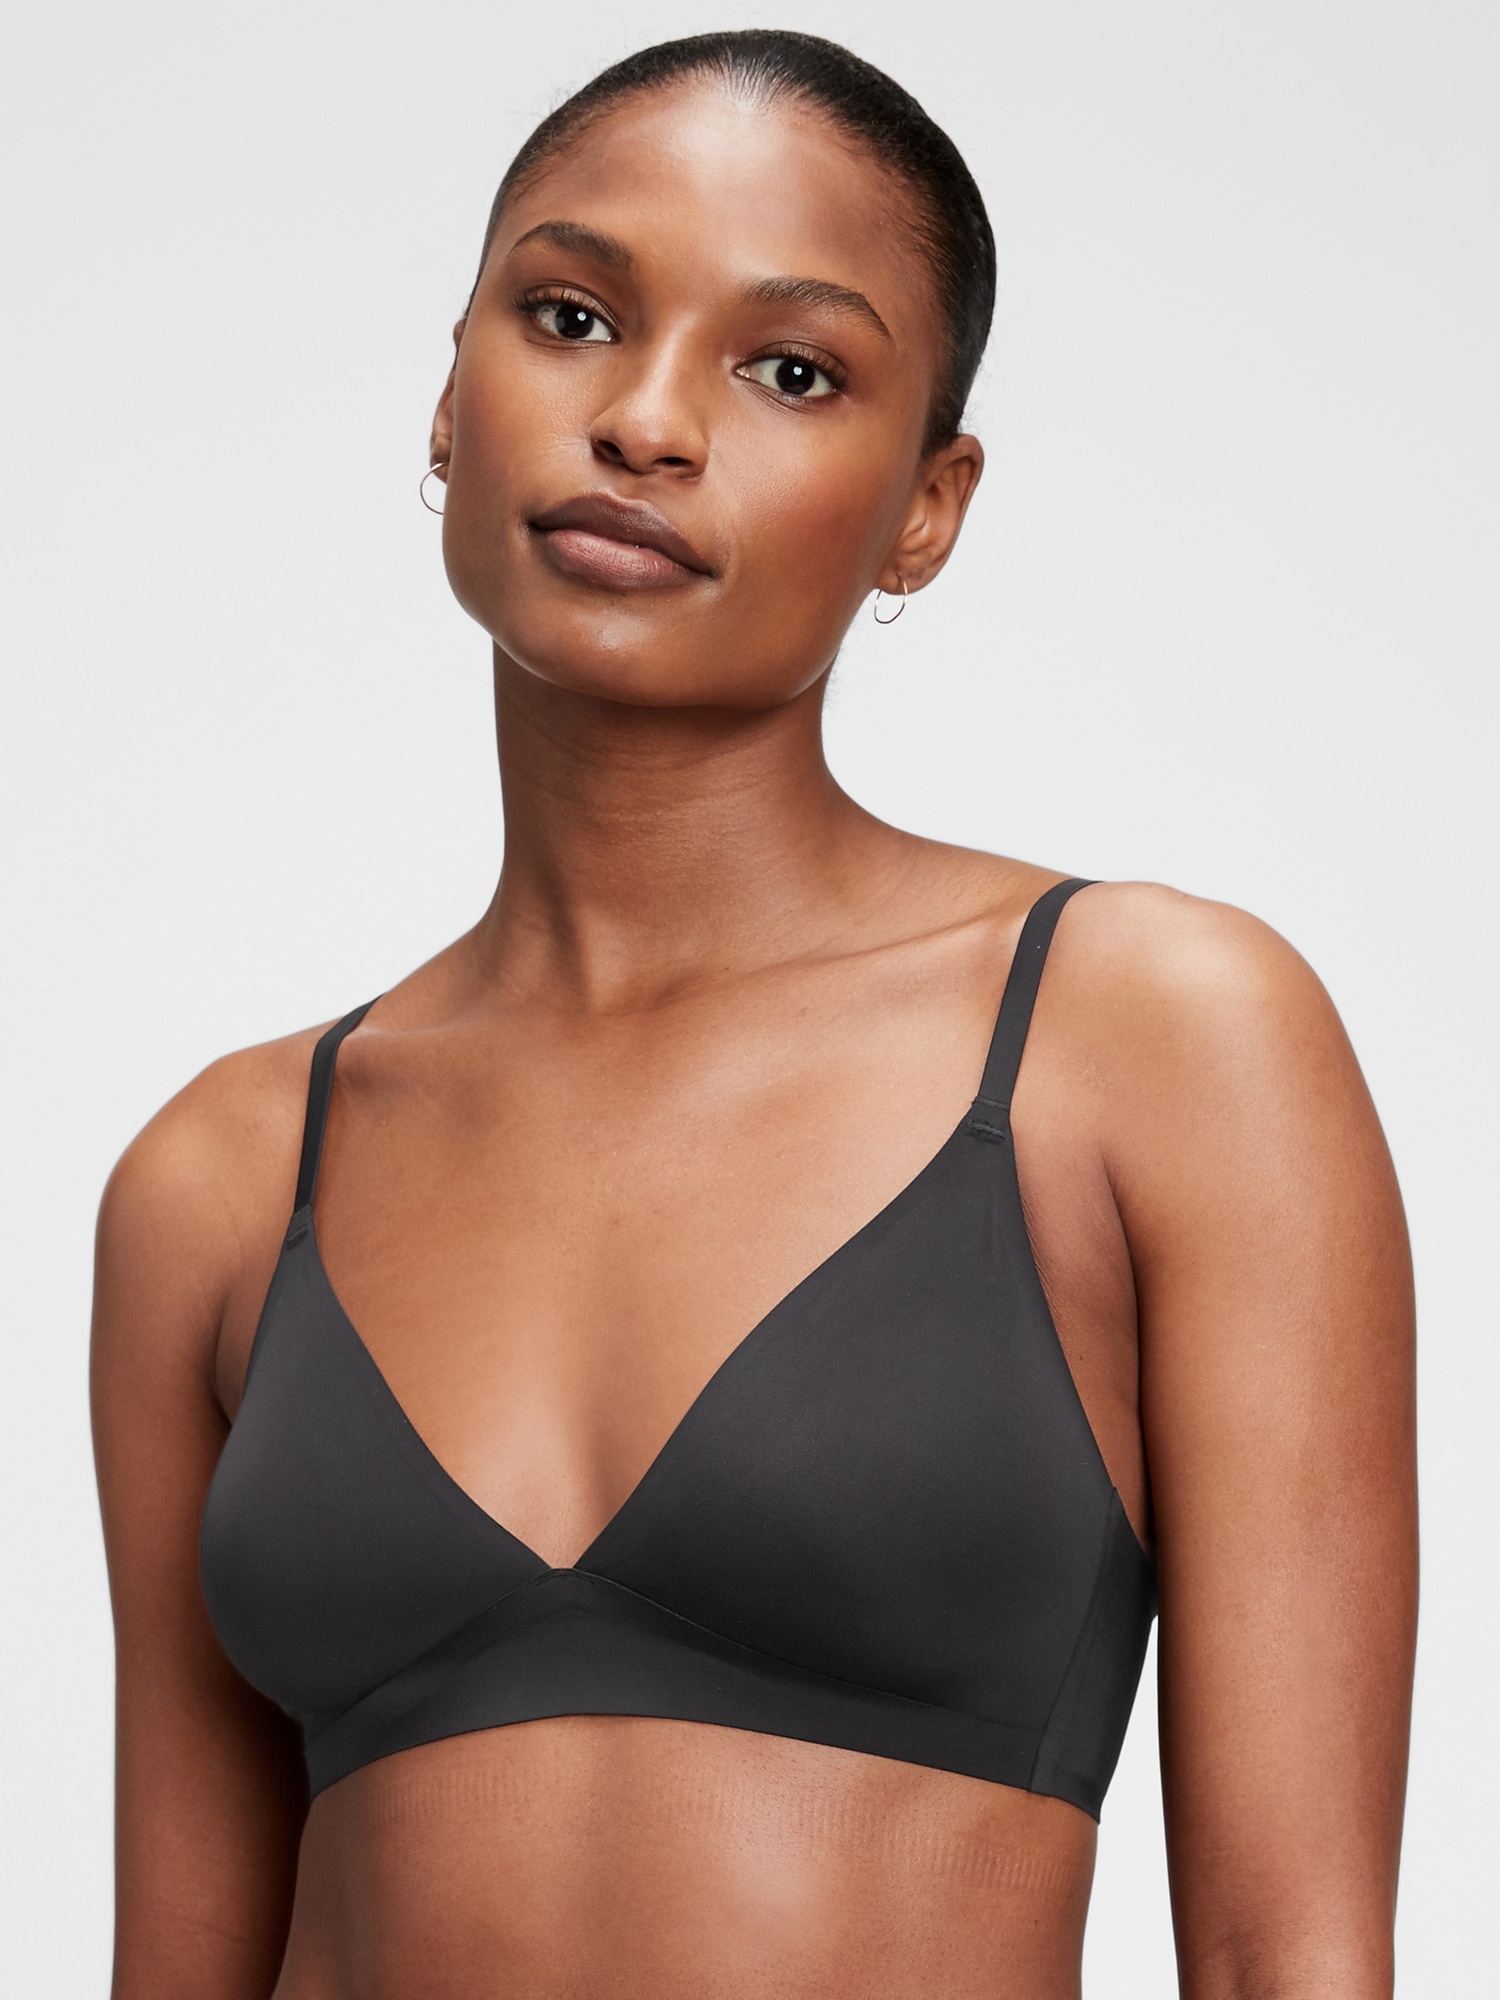 Is That The New Space Dye No Show Bralette ??